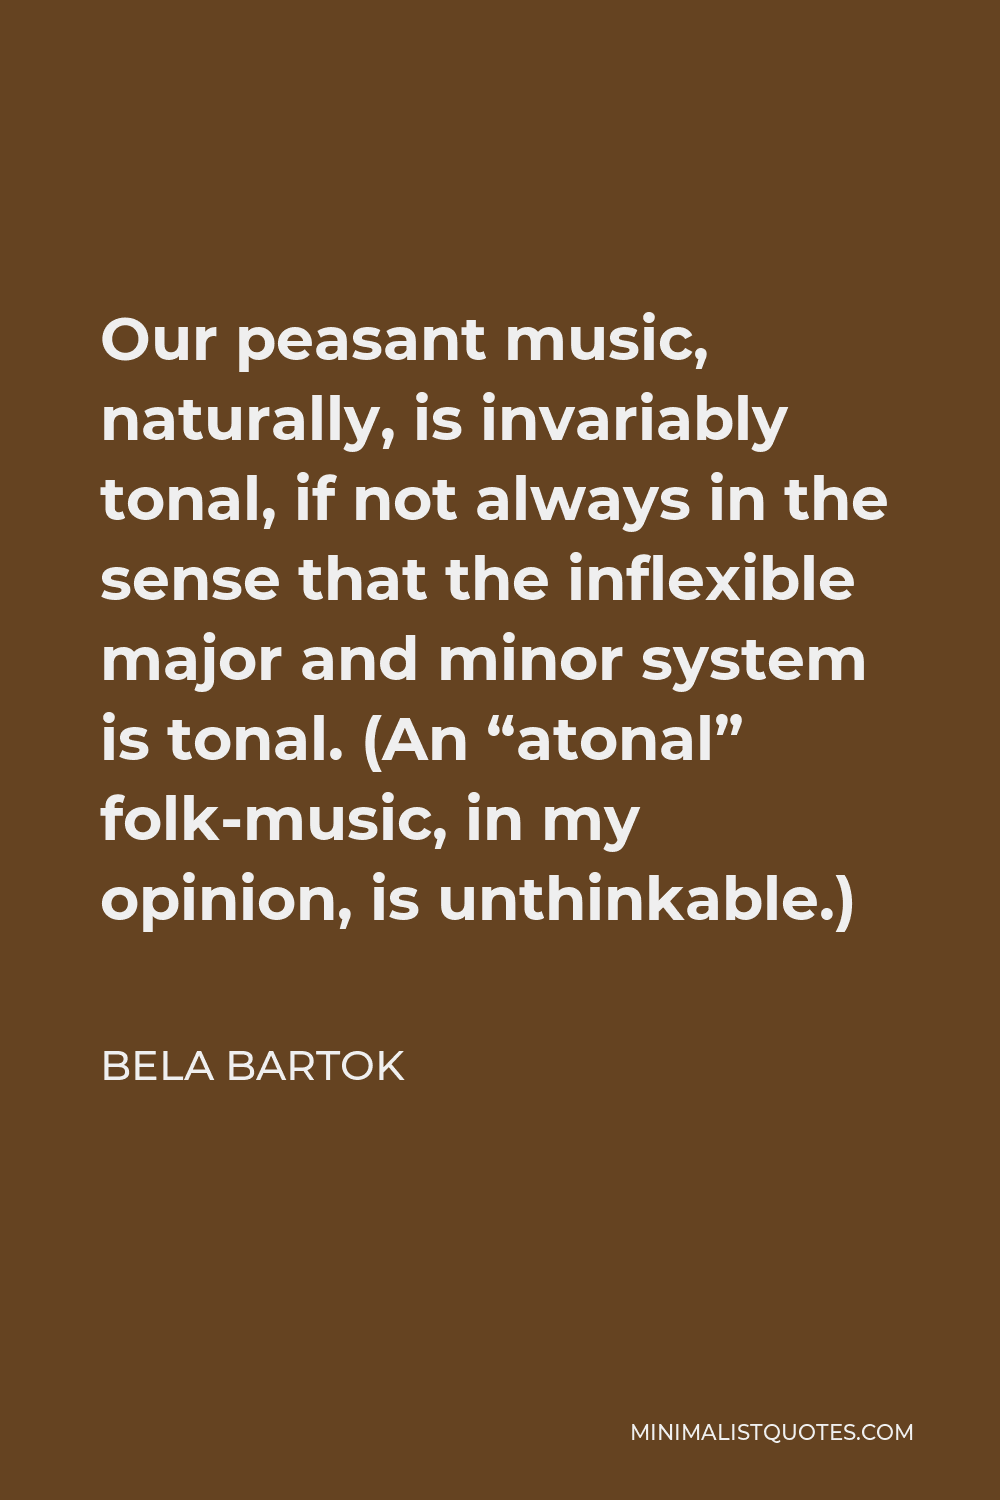 Bela Bartok Quote - Our peasant music, naturally, is invariably tonal, if not always in the sense that the inflexible major and minor system is tonal. (An “atonal” folk-music, in my opinion, is unthinkable.)